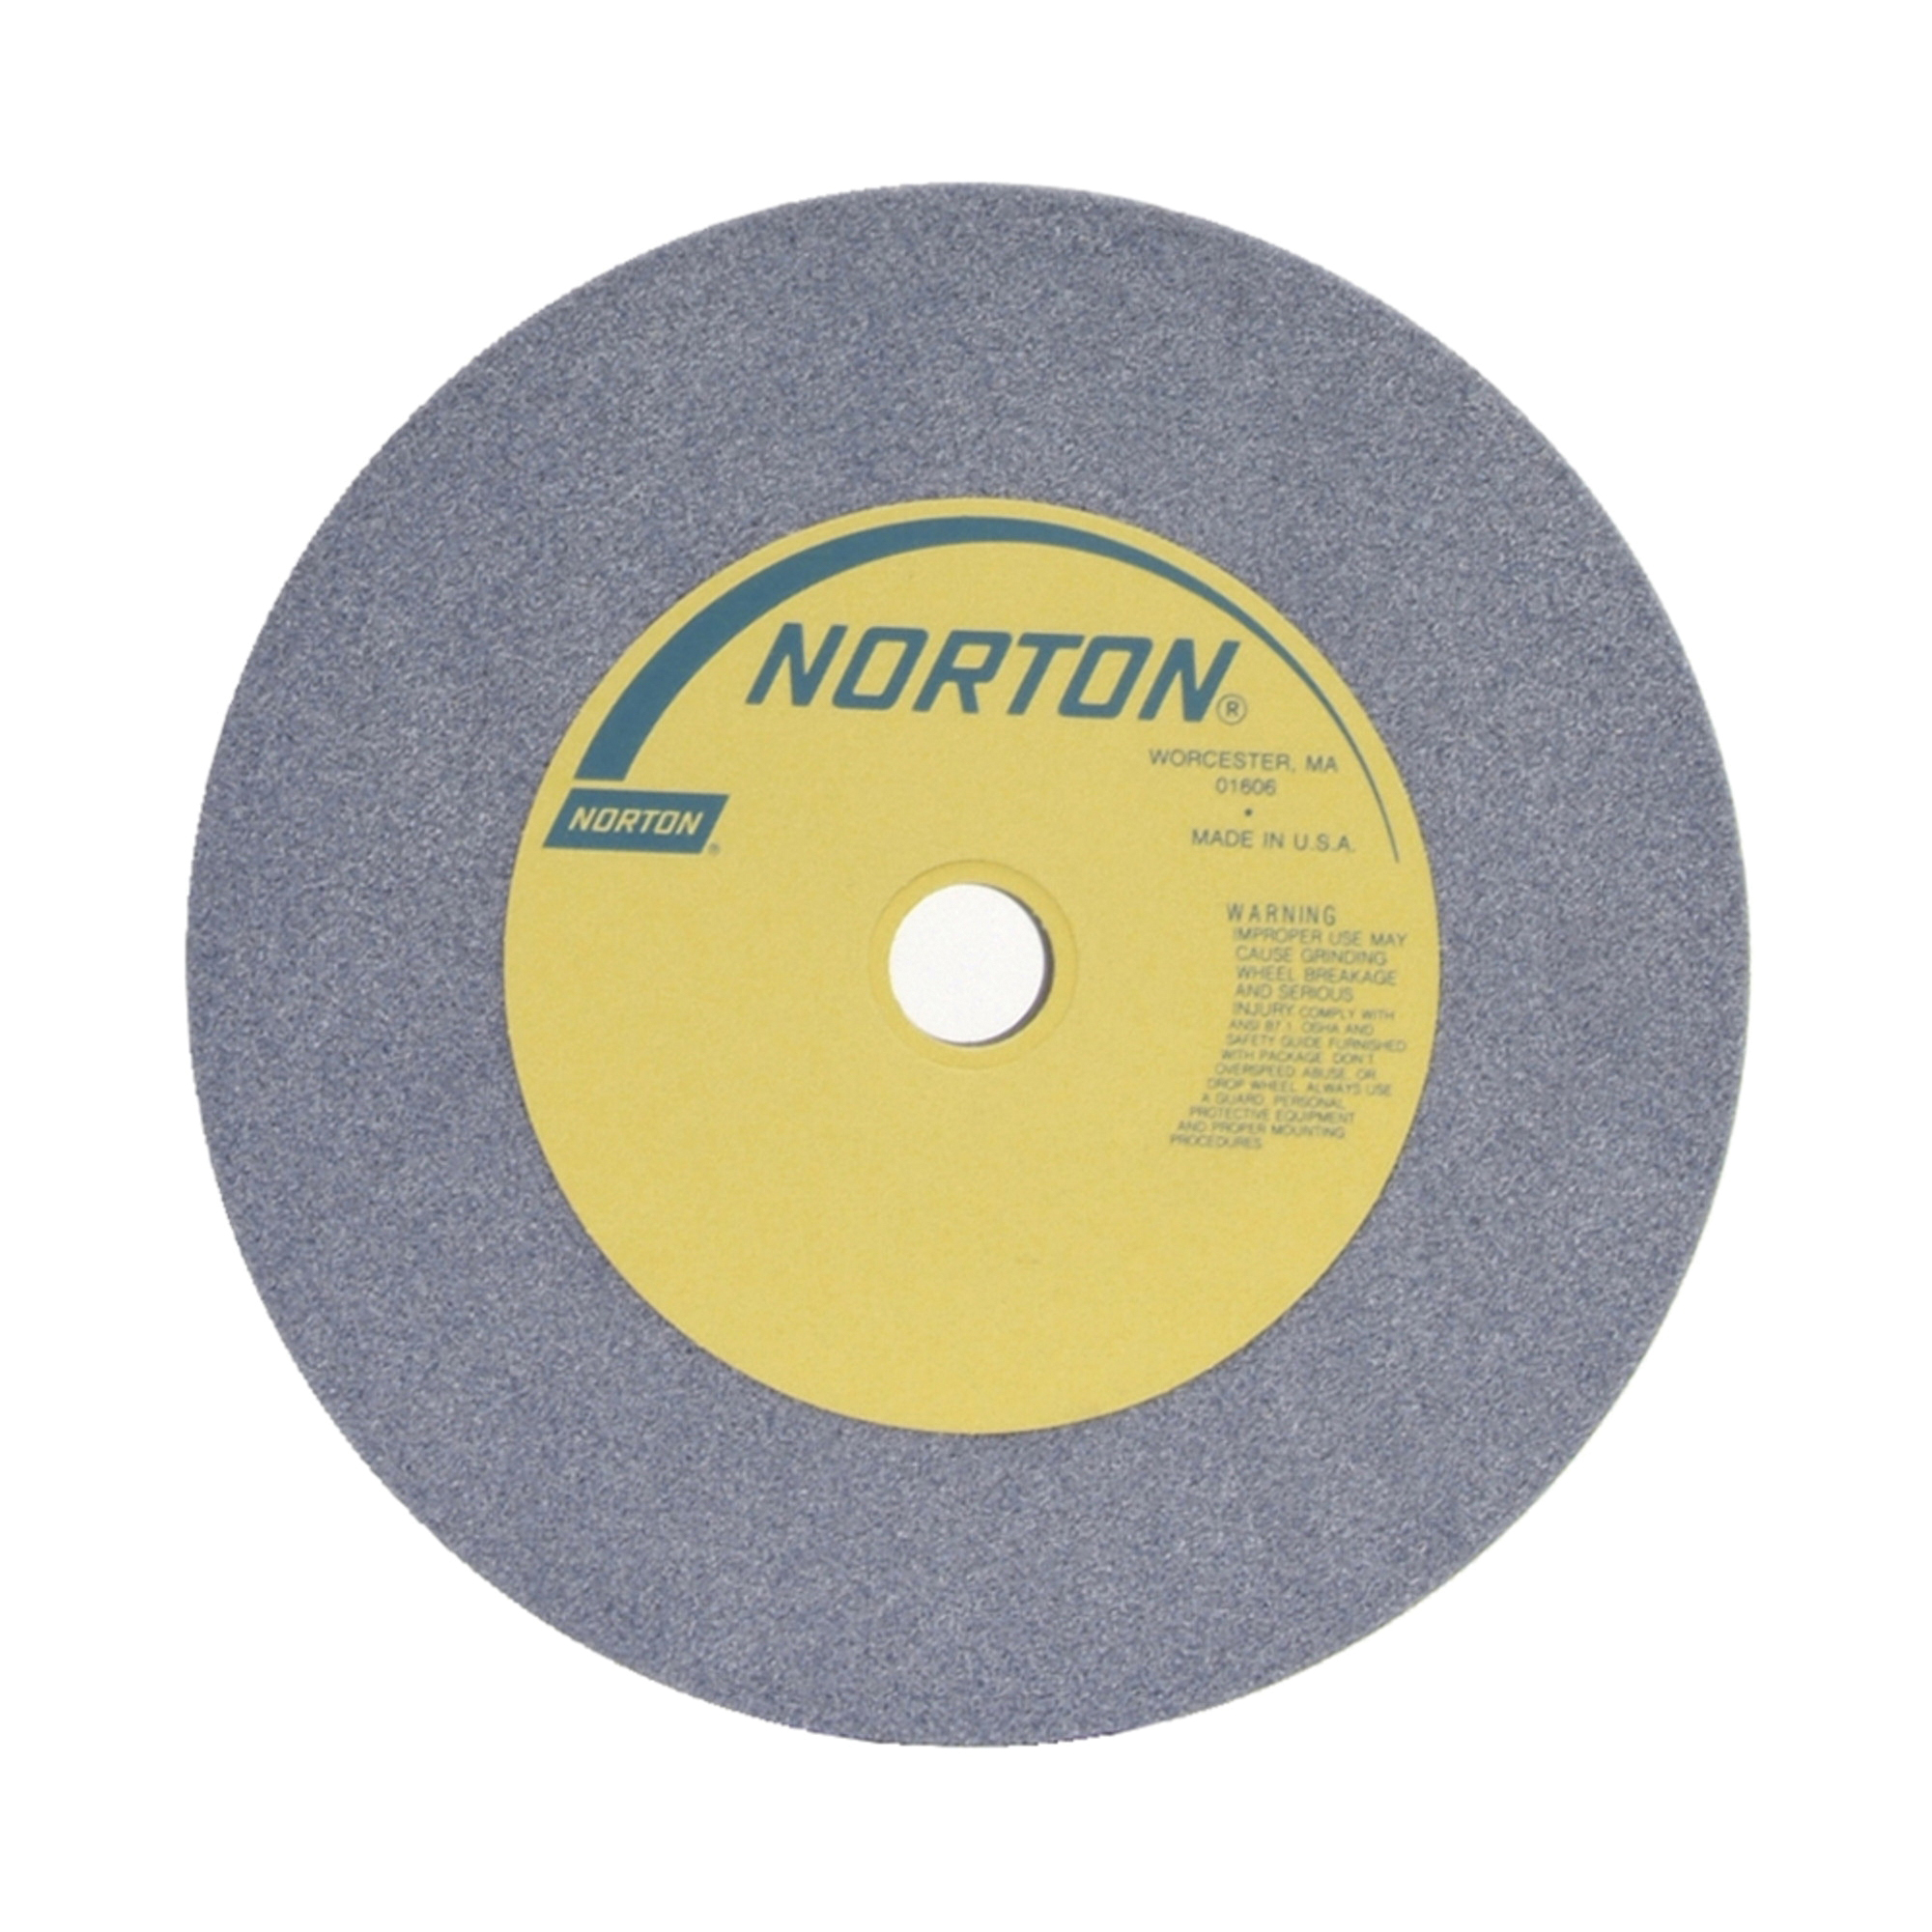 Norton® 66253263461 32A Straight Toolroom Wheel, 12 in Dia x 2 in THK, 1-1/4 in Center Hole, 46 Grit, Aluminum Oxide Abrasive